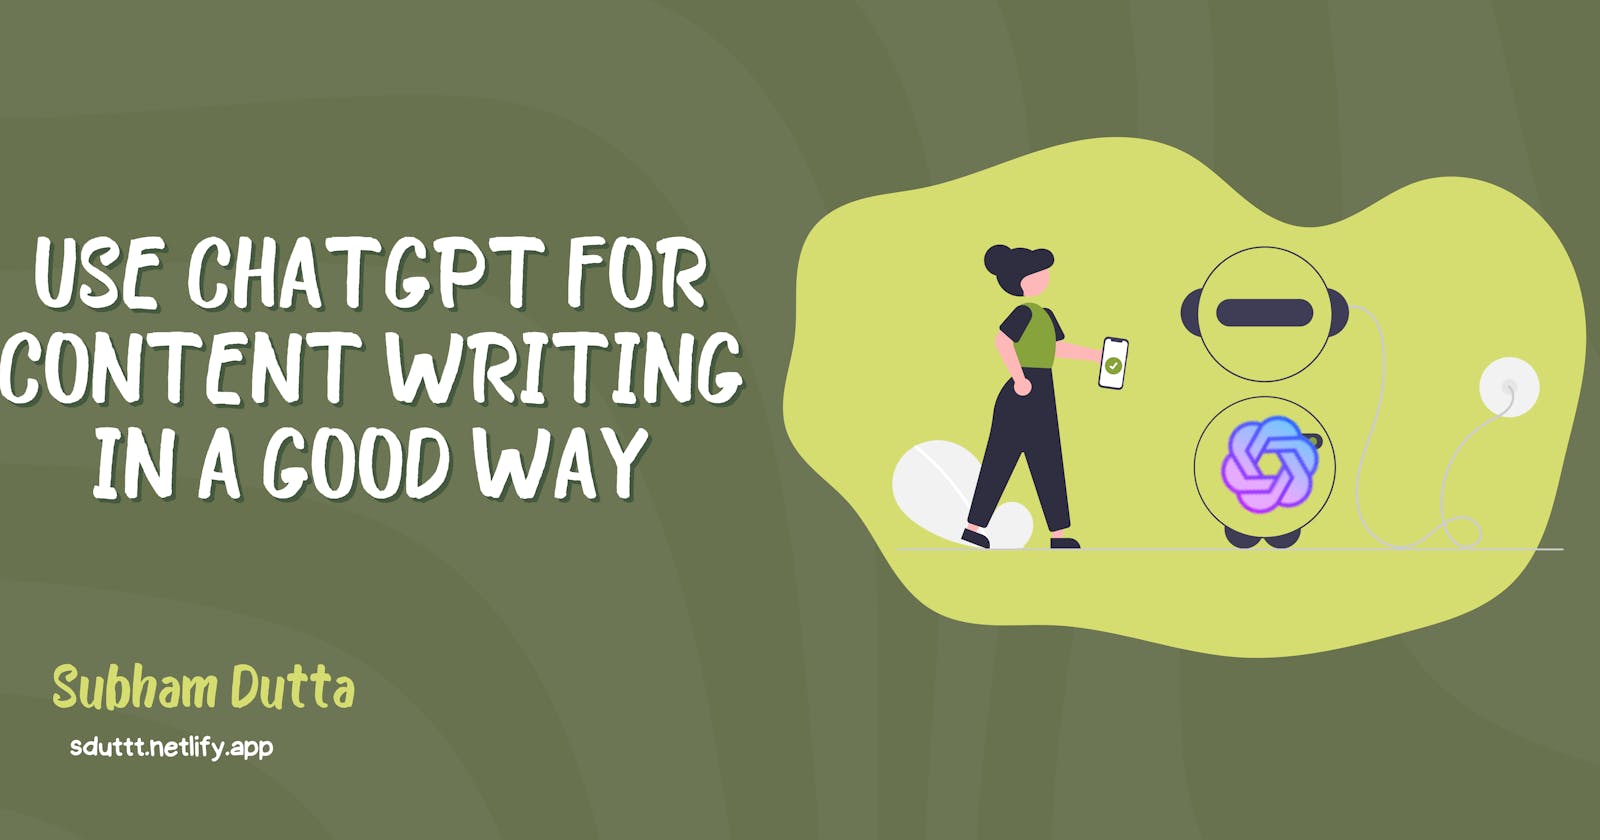 Use ChatGPT for Content Writing in a Good Way